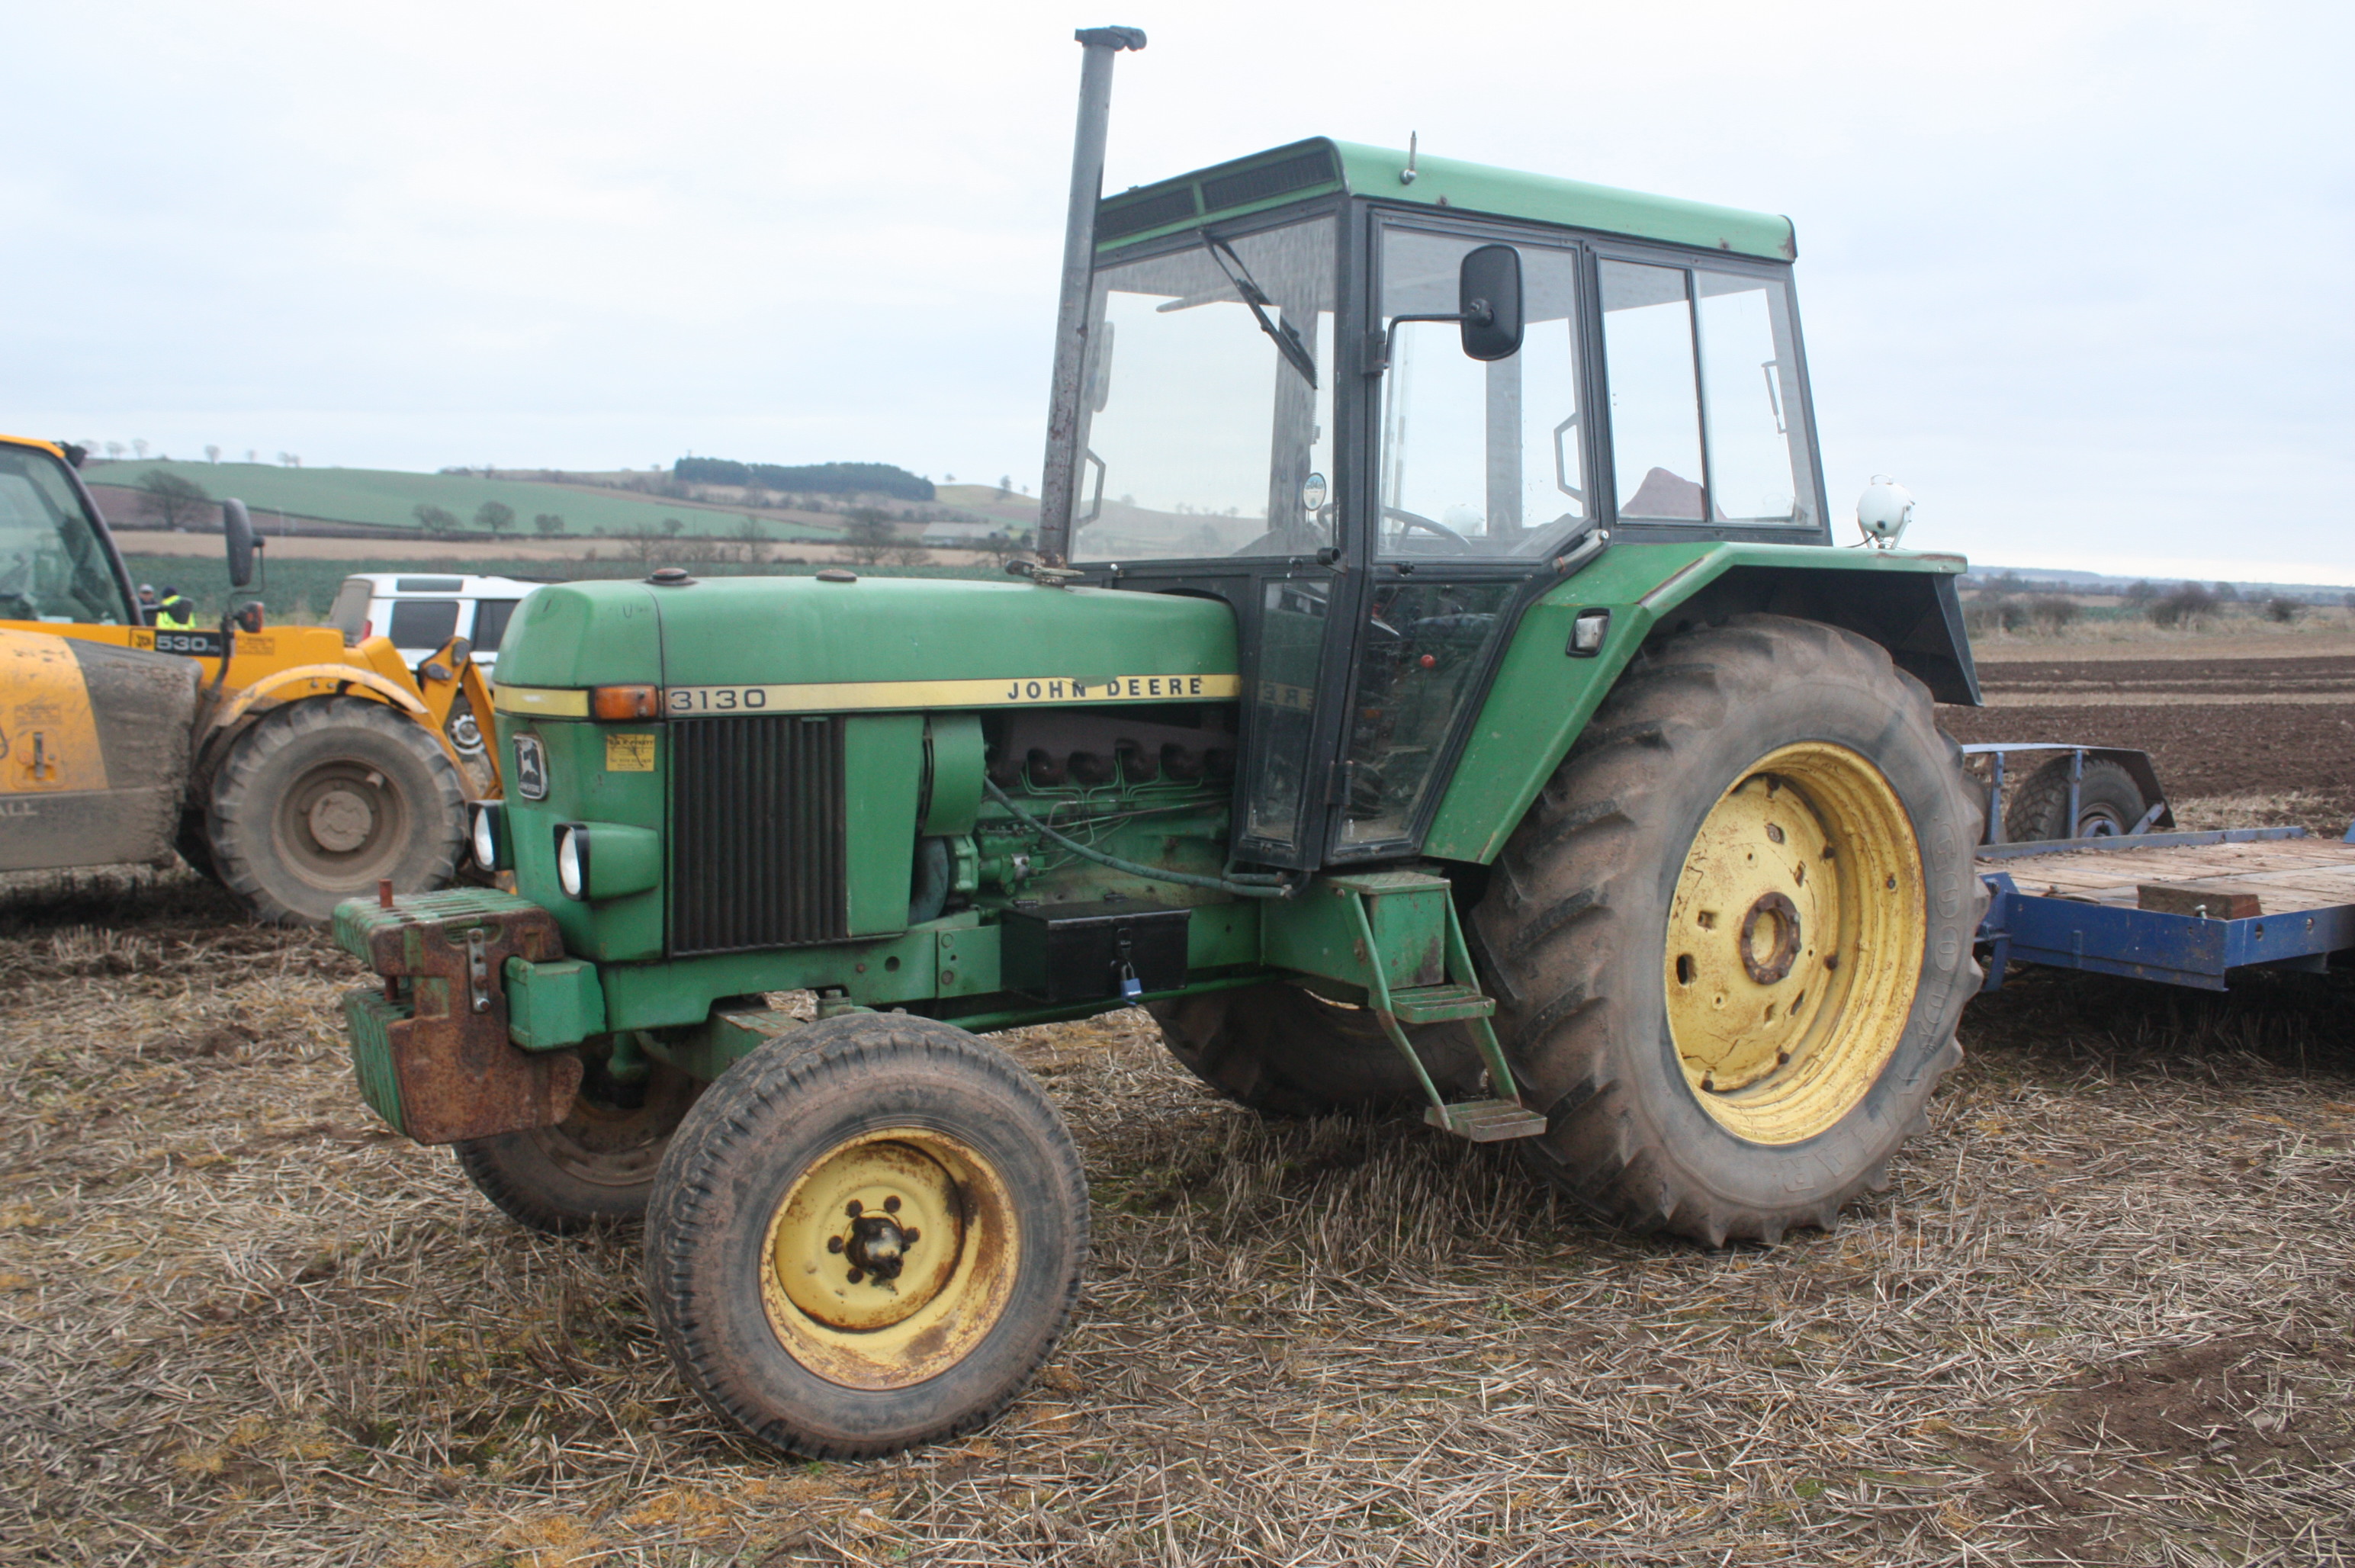 john deere 3130 - tractor & construction plant wiki - the